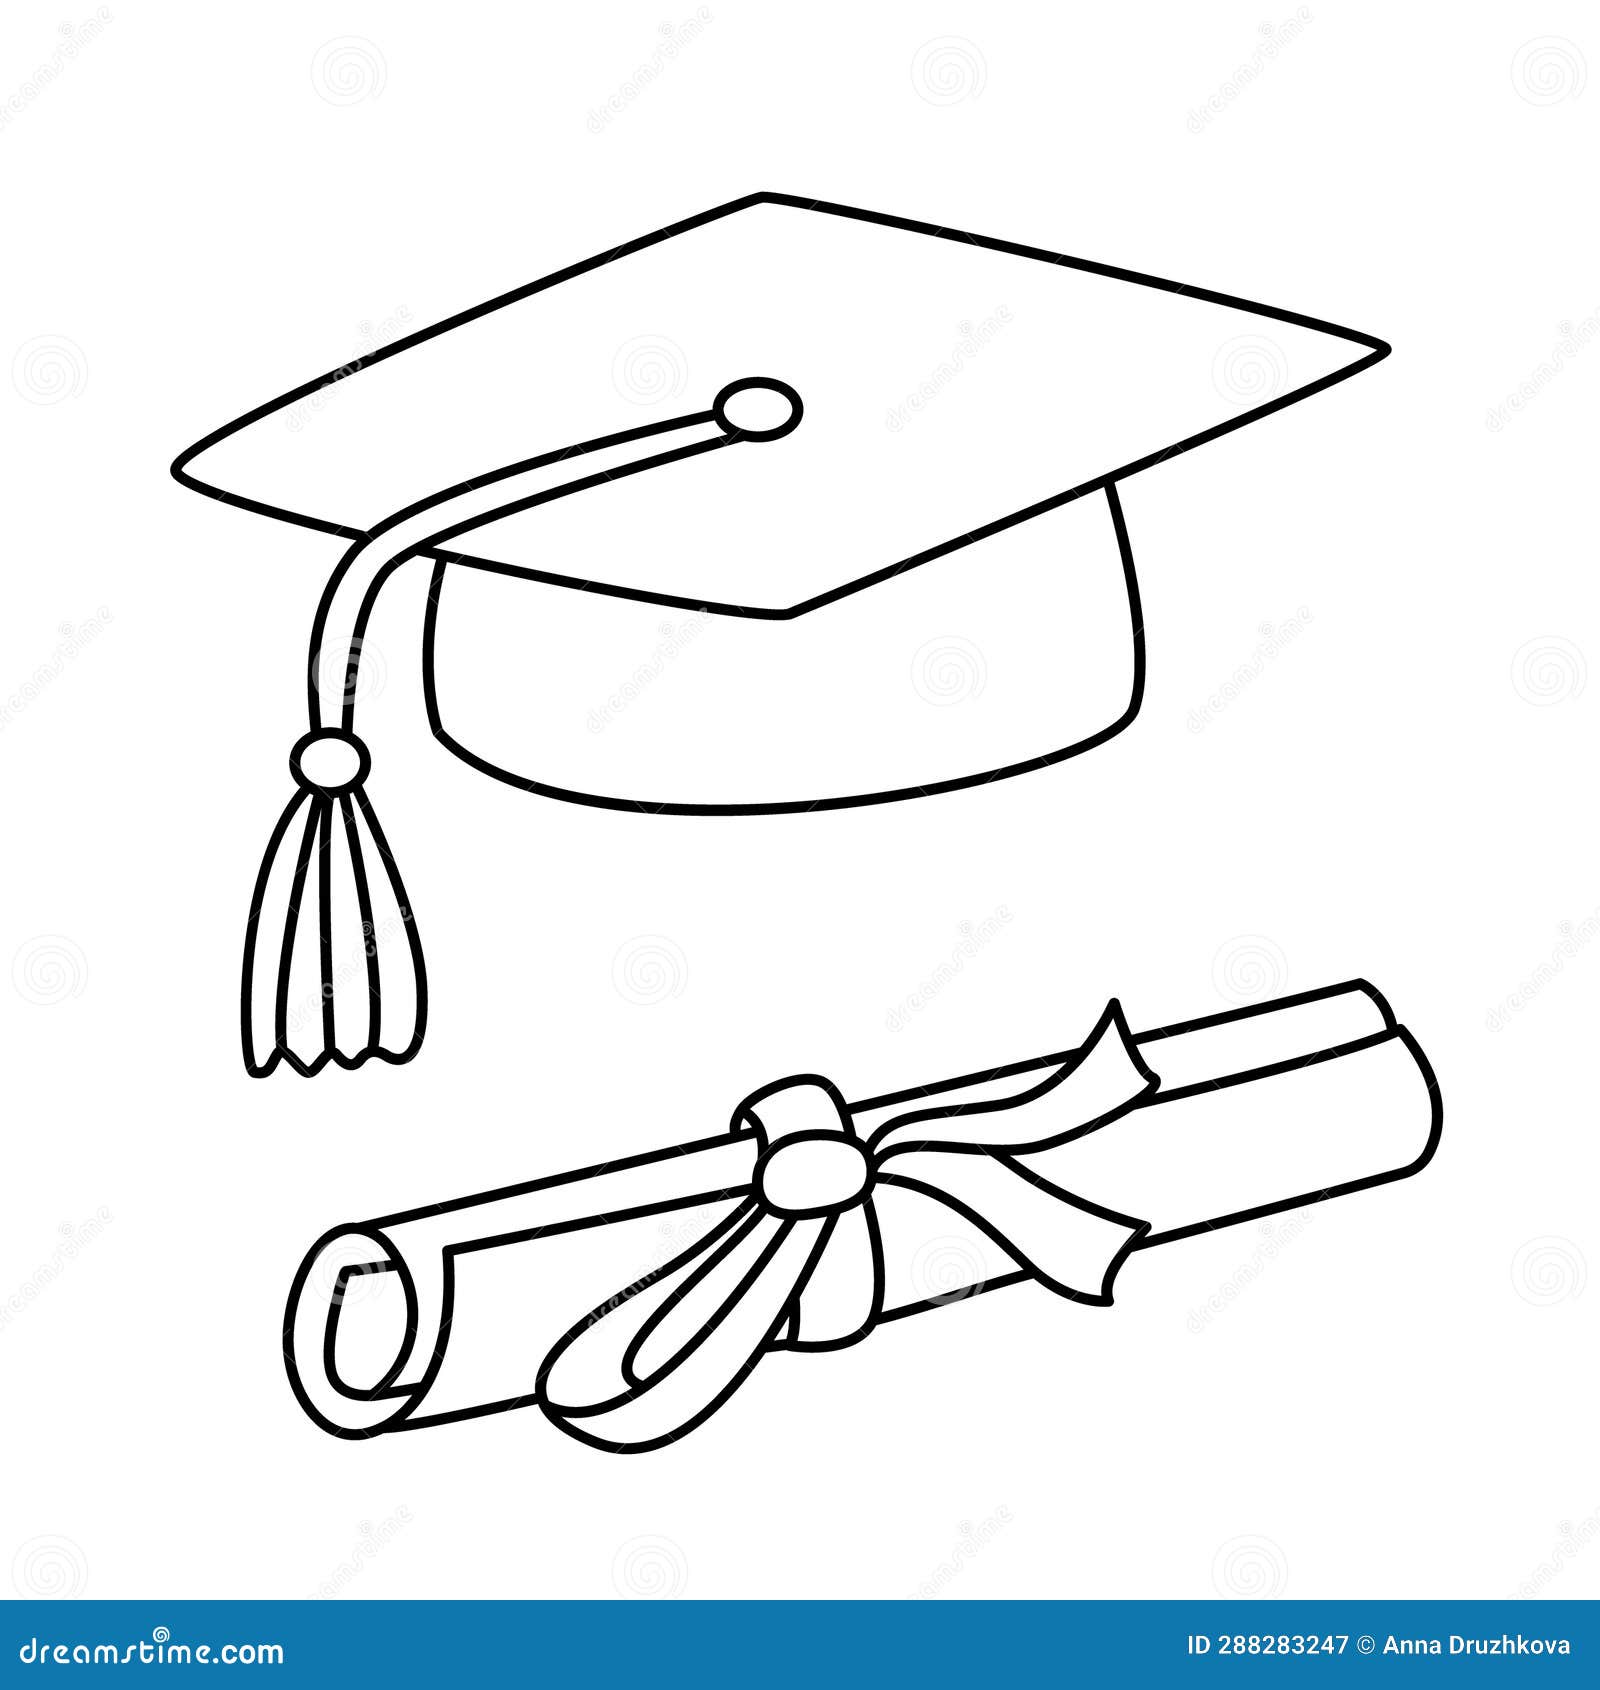 Square Academic Cap and Diploma Hand Drawn Doodle Illustration Stock ...